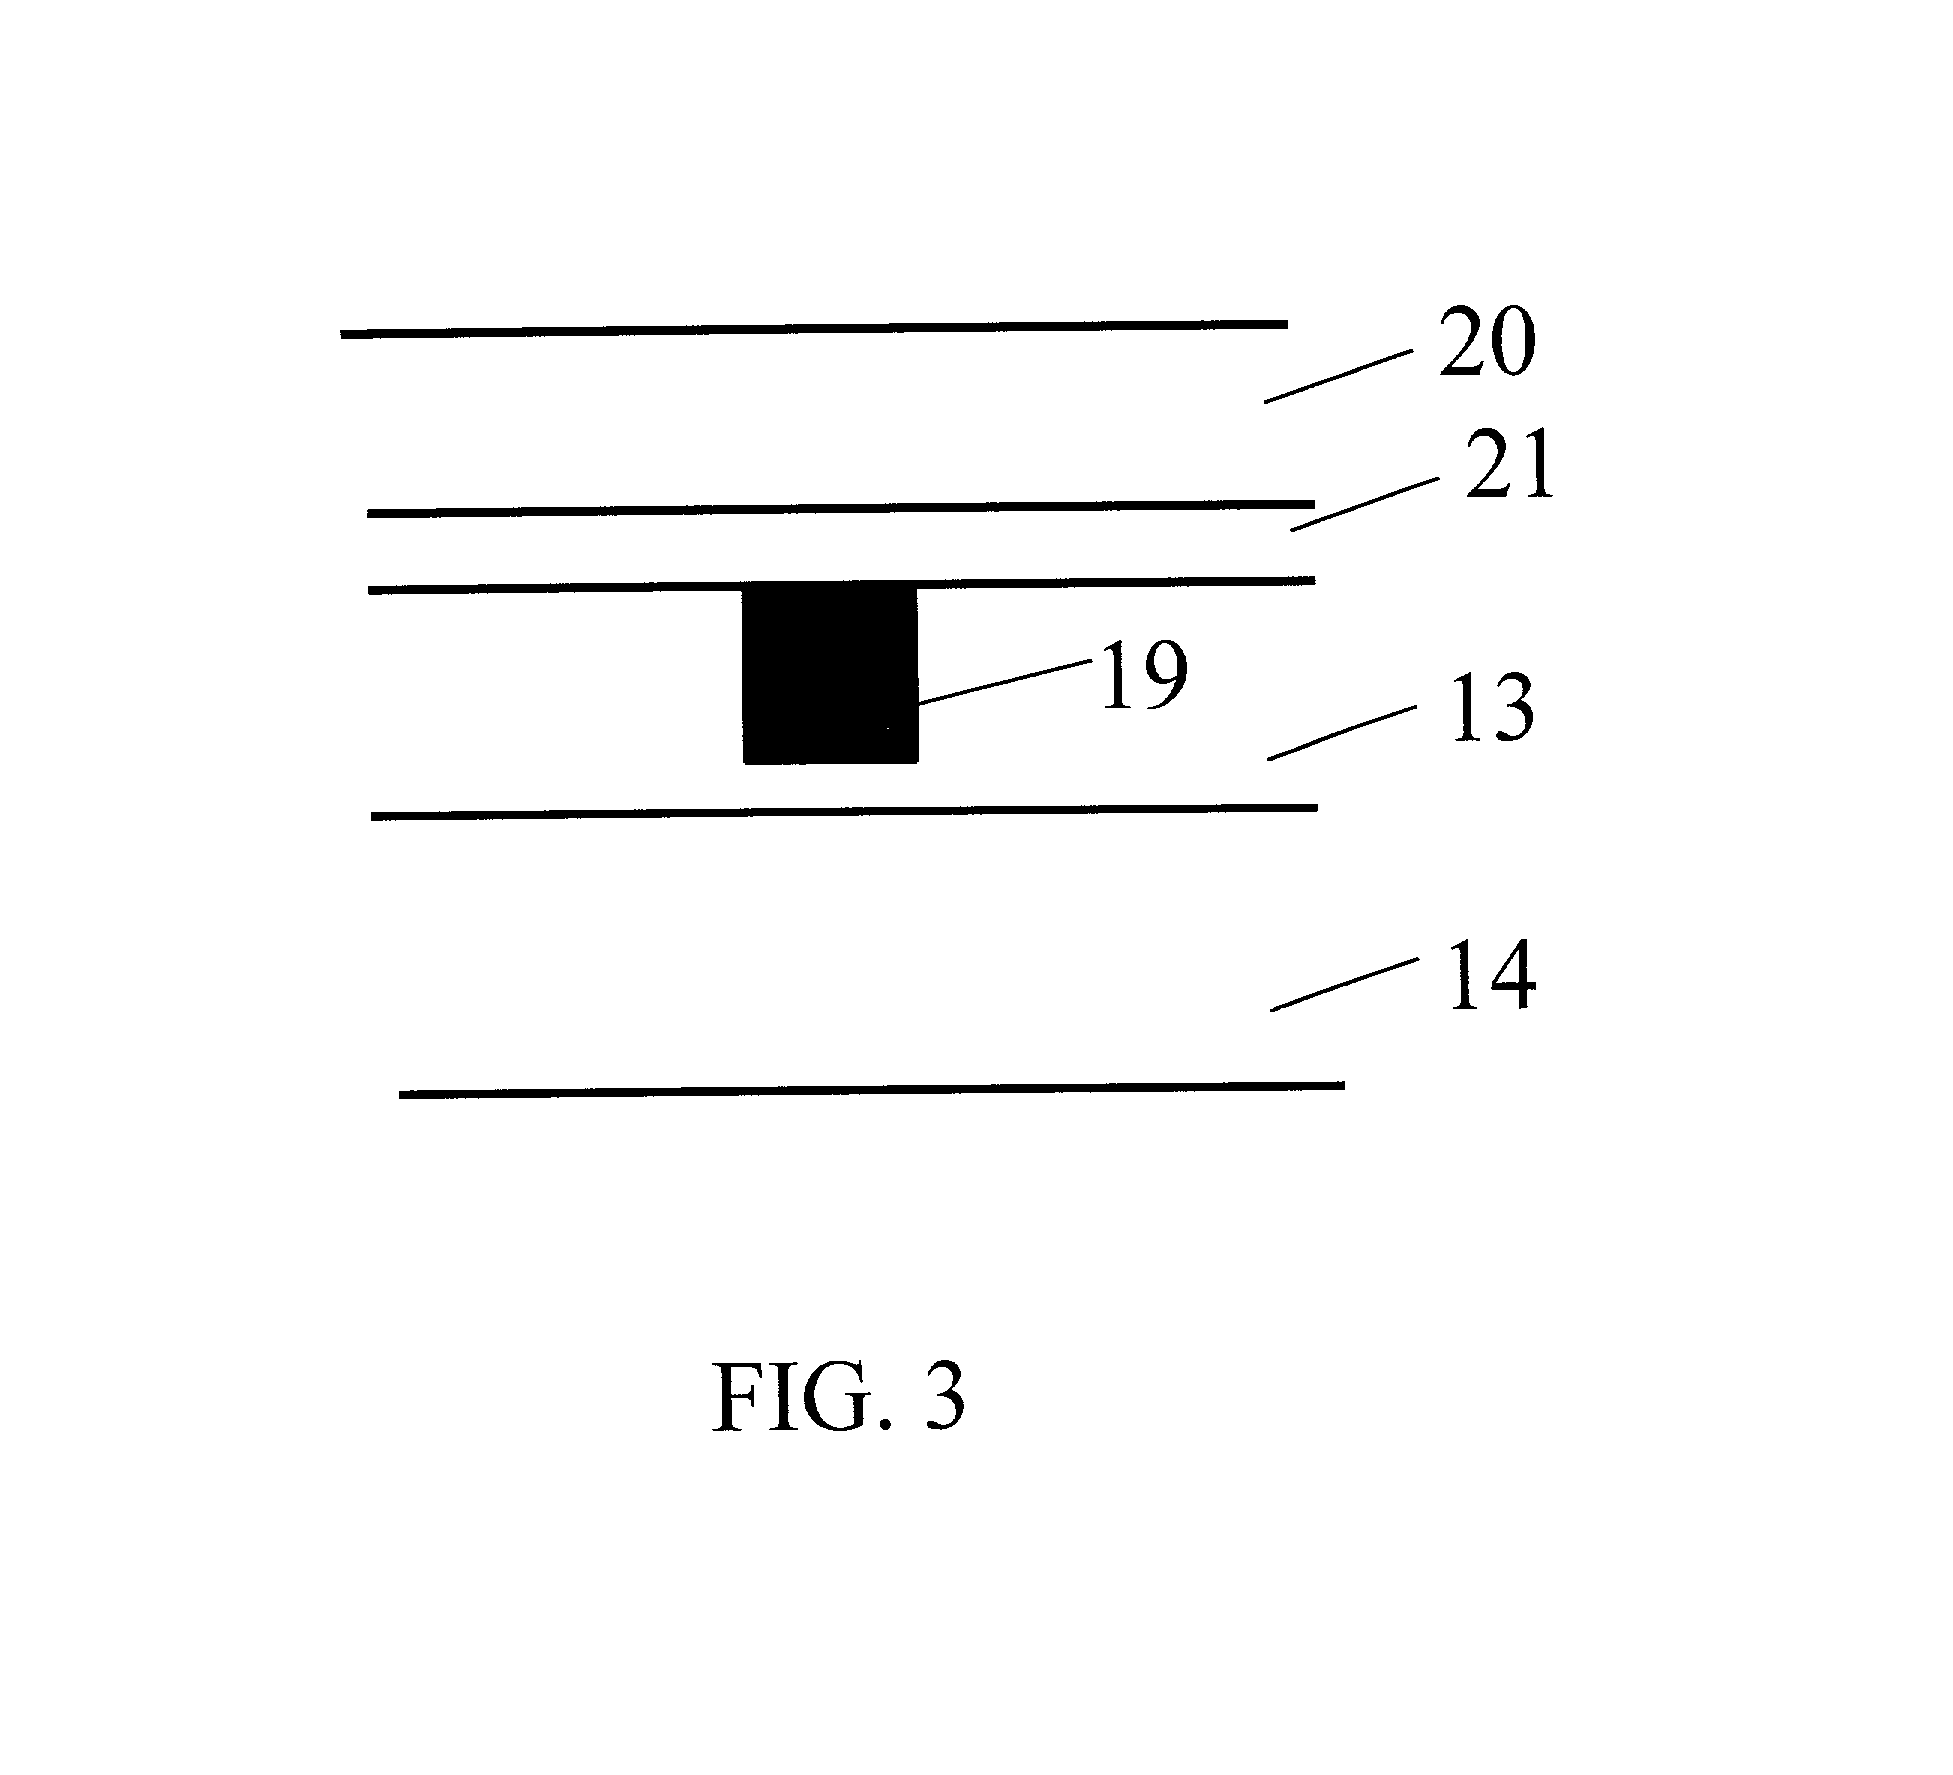 Methods and apparatus for presbyopia correction using ultraviolet and infrared lasers